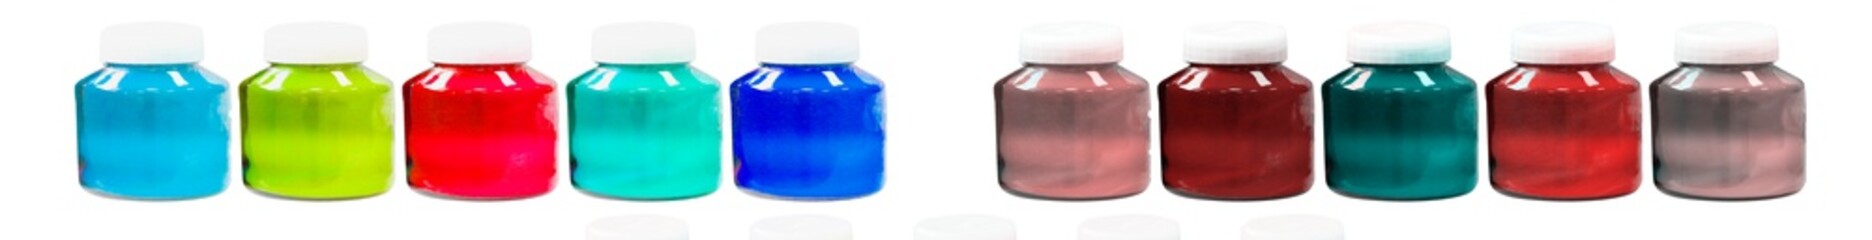 Set of colorful glass jars with plastic lids. isolated on white for your design. Yellow, violet, blue, red, green. Full banner format.